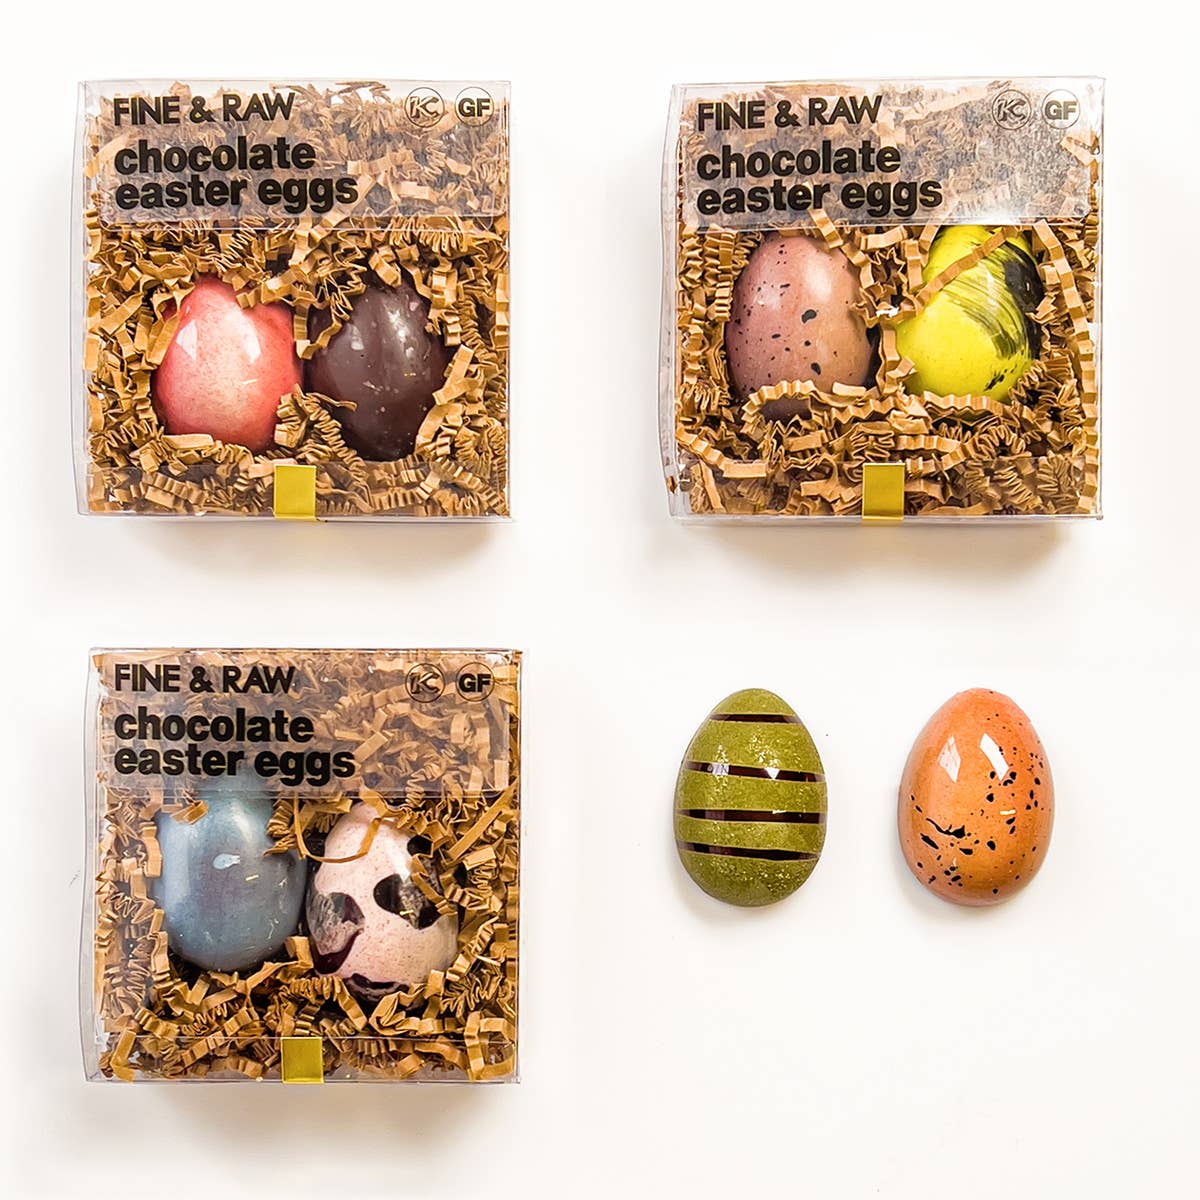 Chocolate Easter Eggs by FINE & RAW